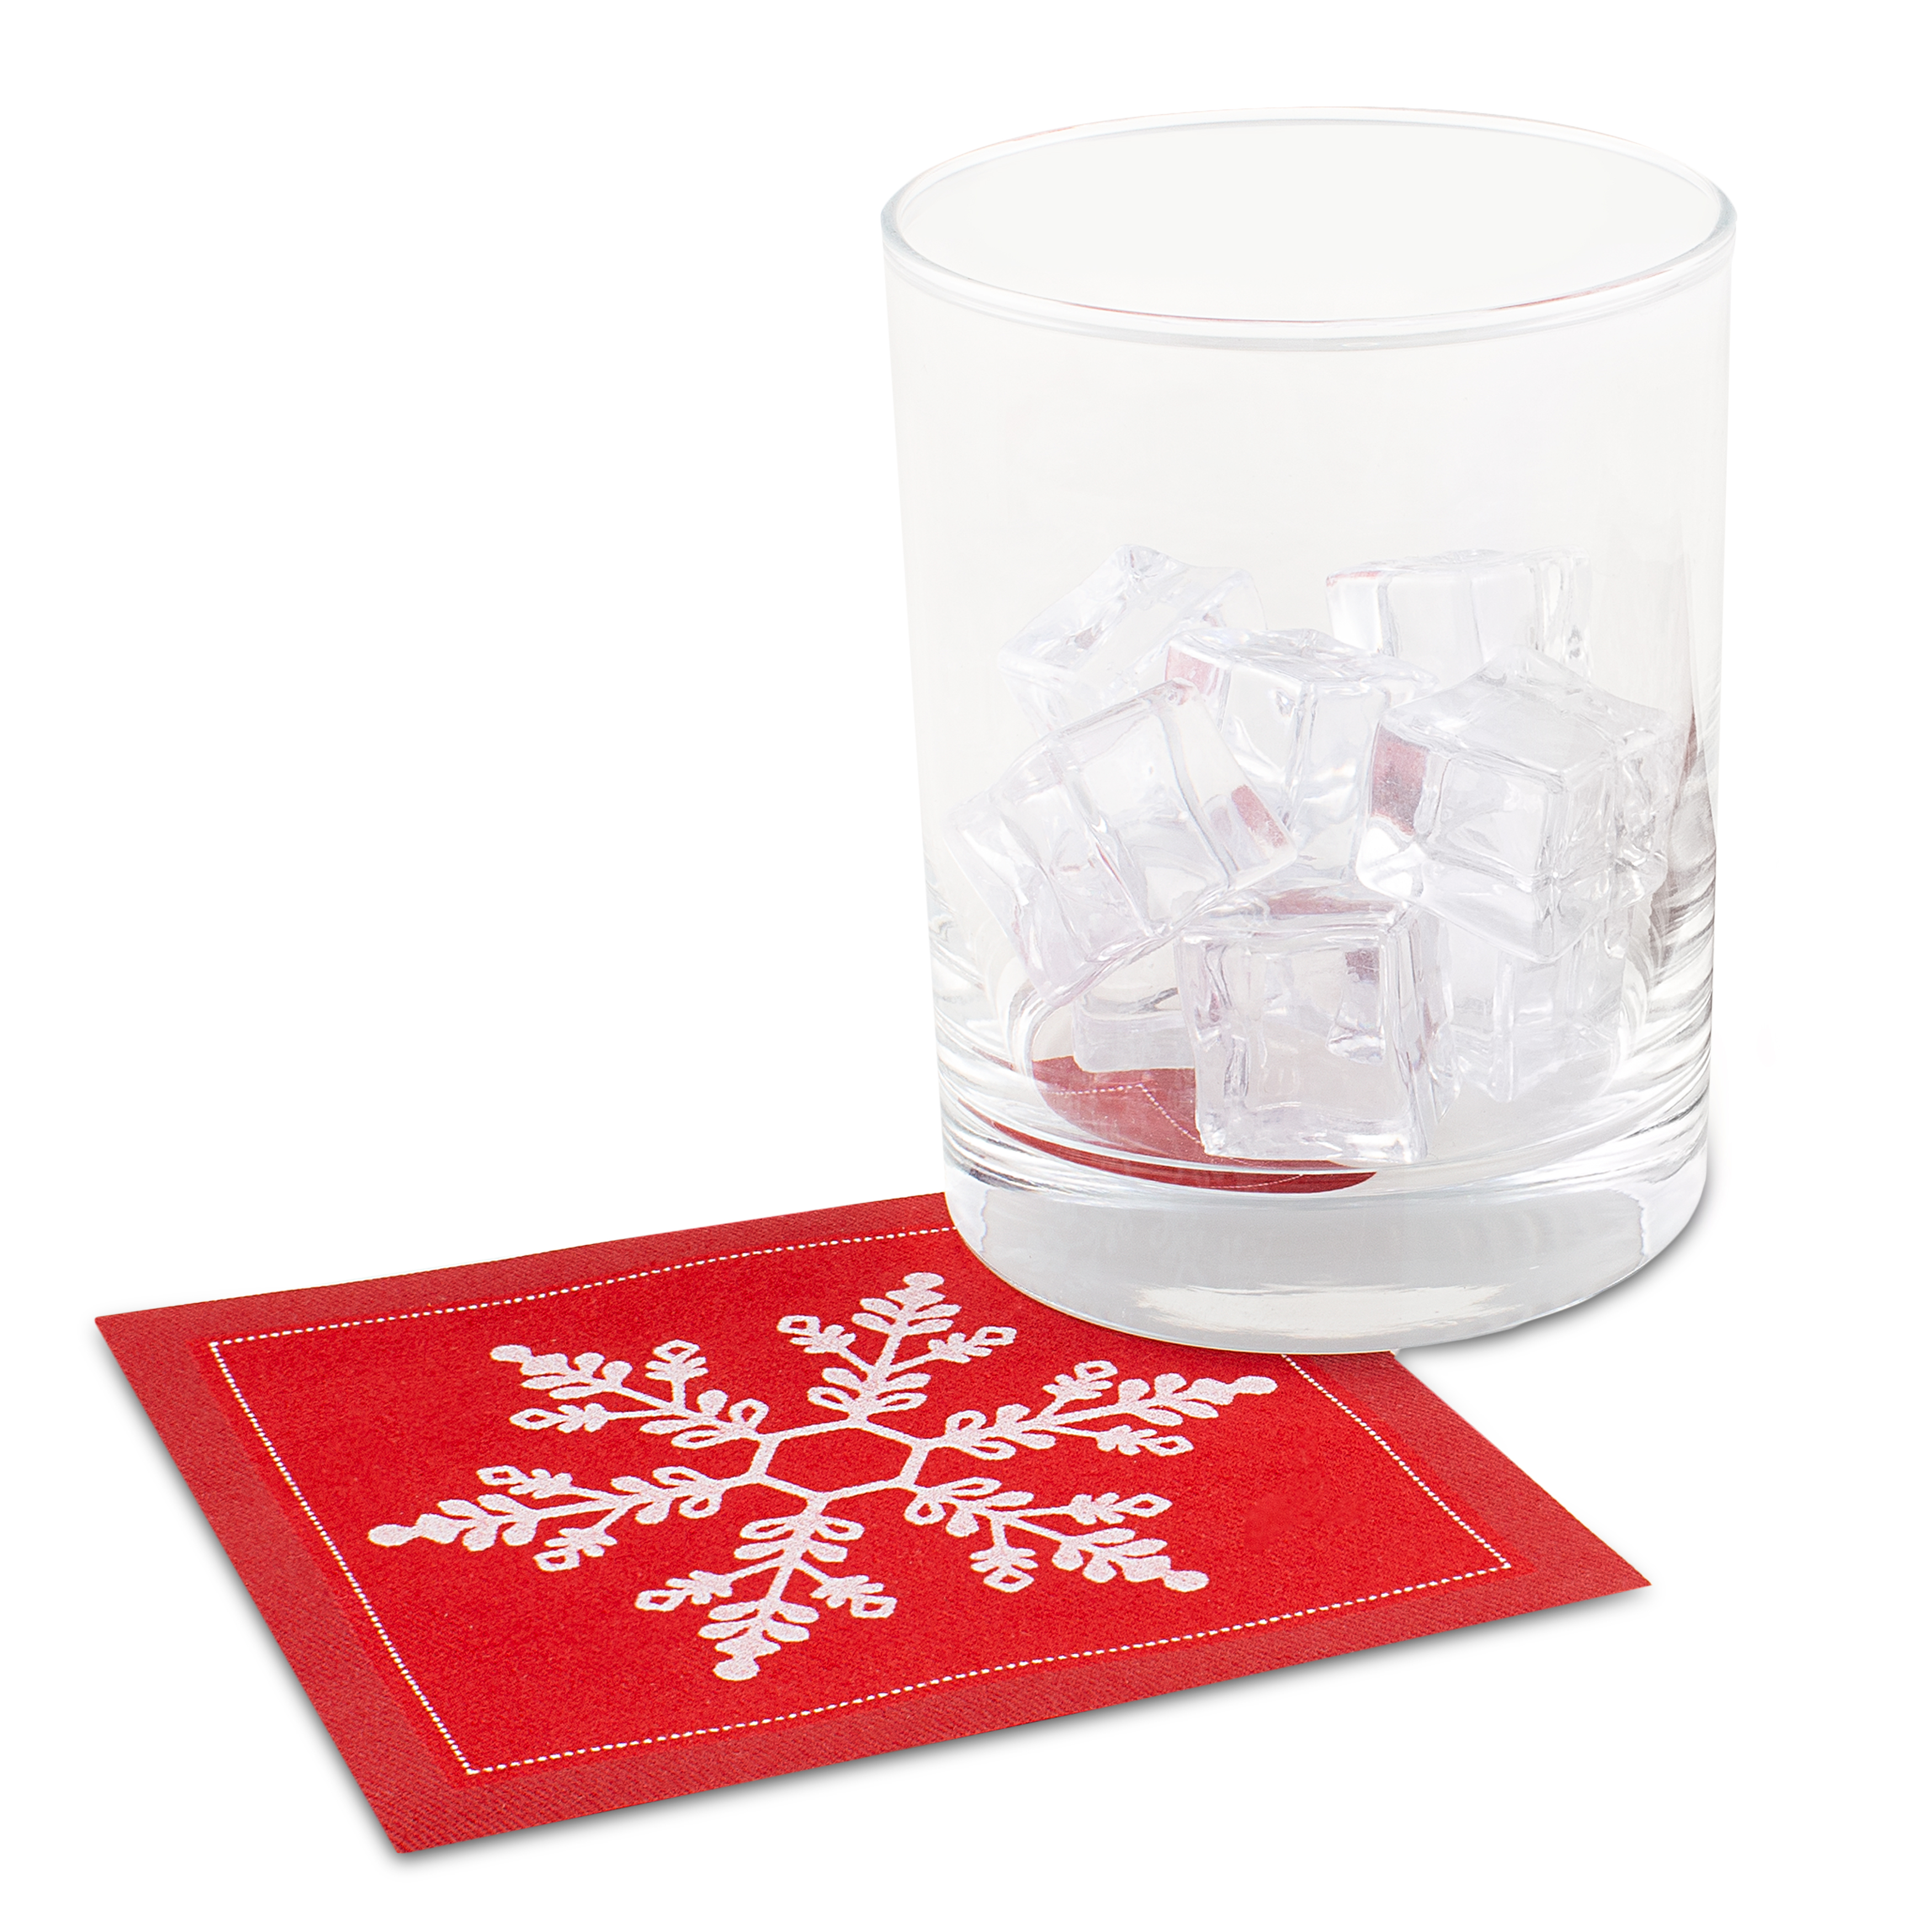 Snowflake Red Cotton Cocktail (200GSM)- 4.5" x 4.5" - 1200 Units